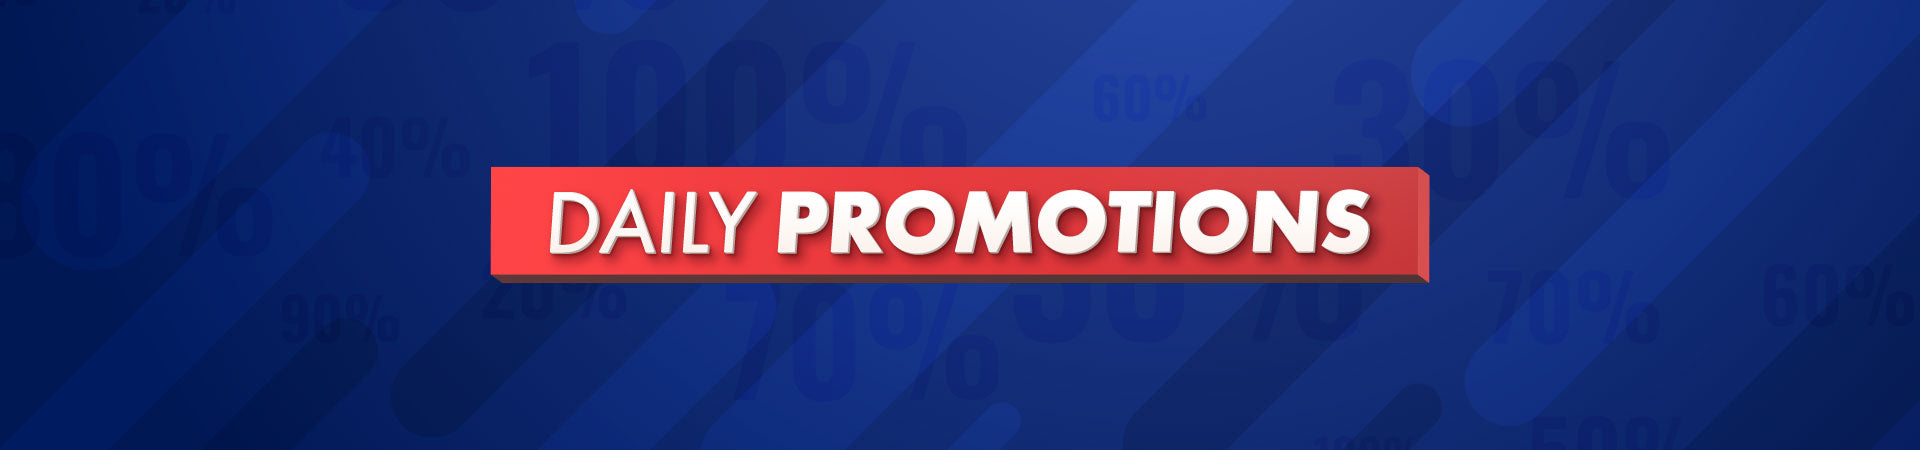 Daily Promotions